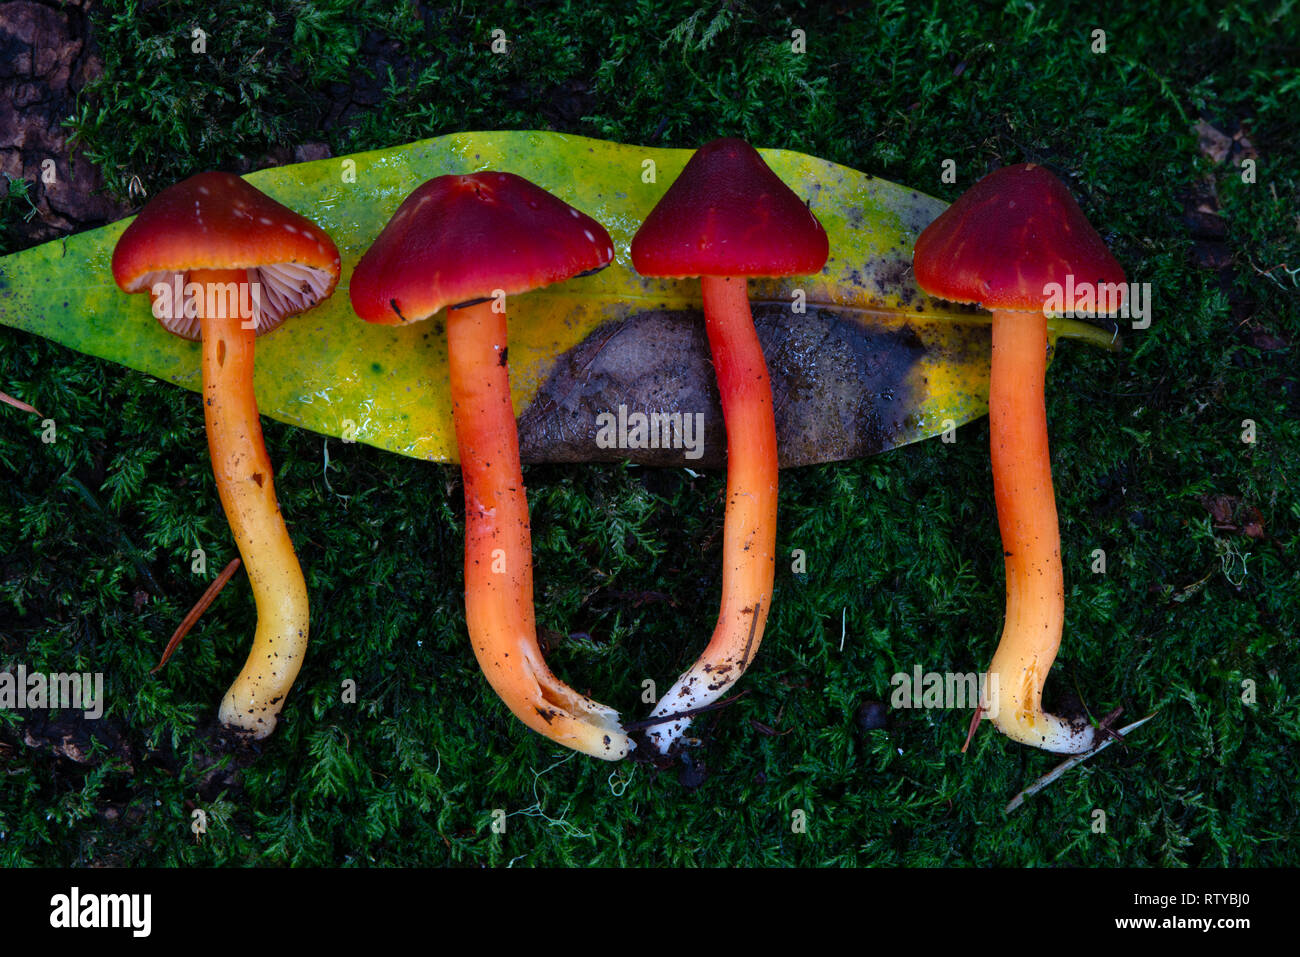 Four scarlet waxy cap mushrooms on a bed of moss, with a bay laurel leaf. Stock Photo